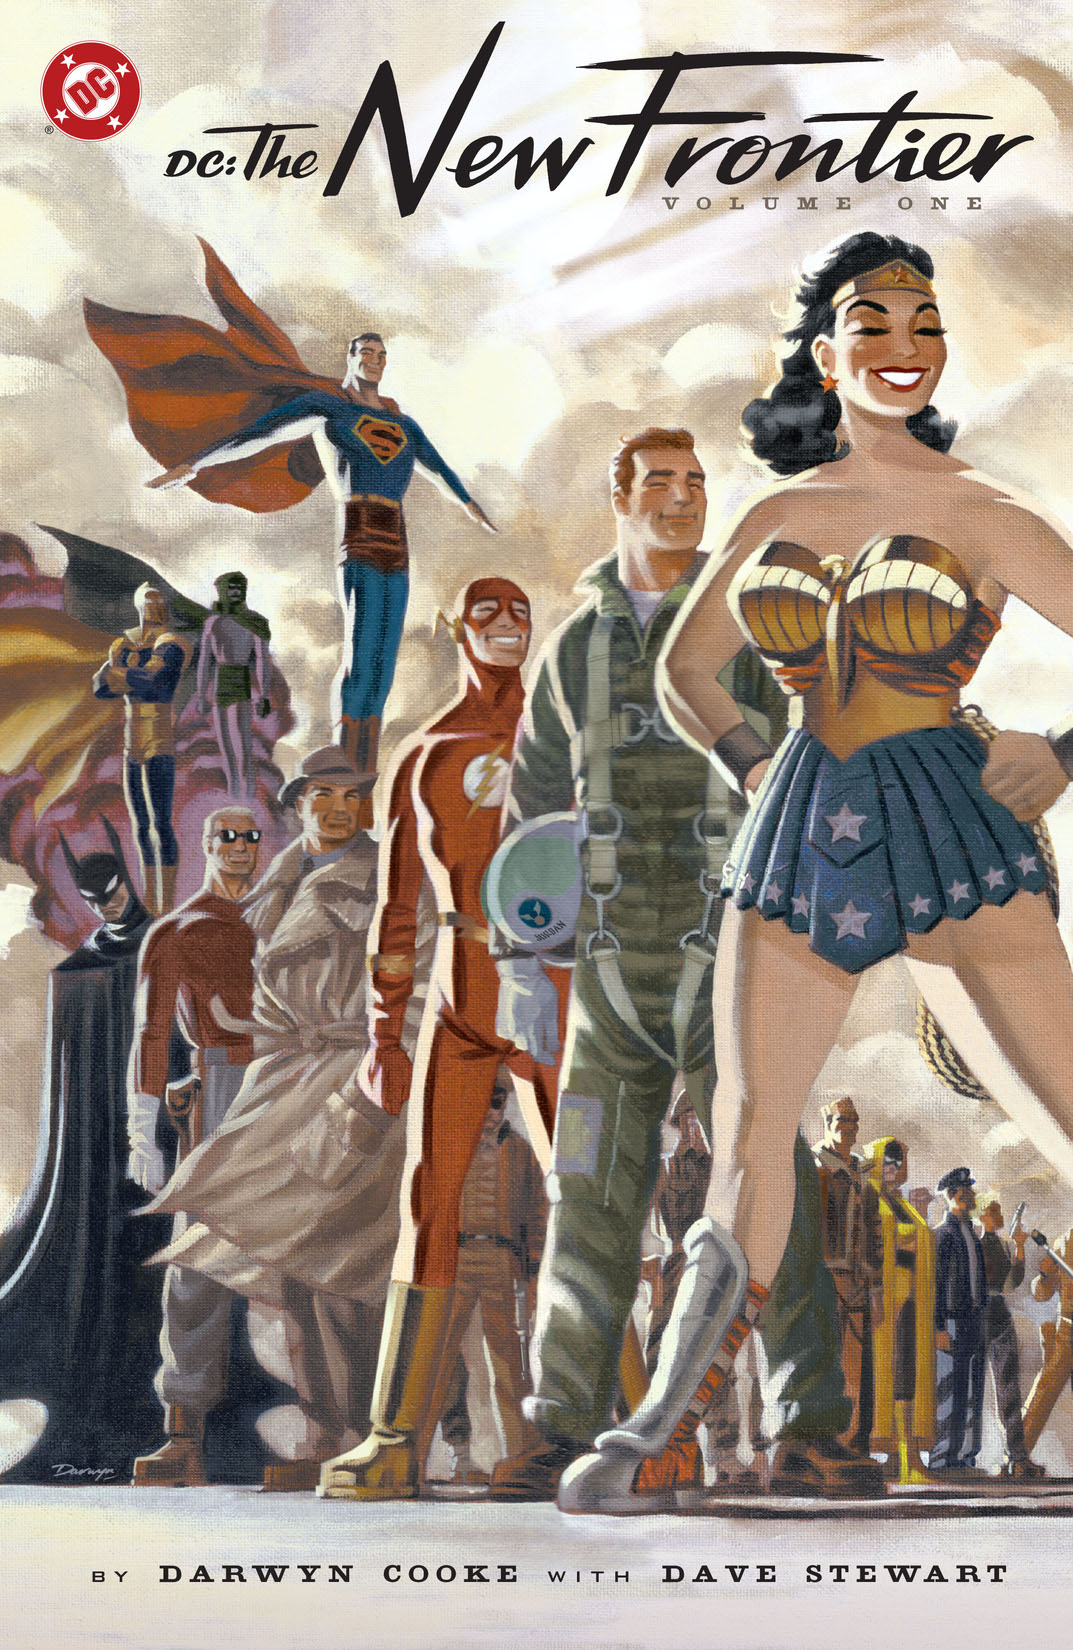 DC: The New Frontier Vol. 1 preview images